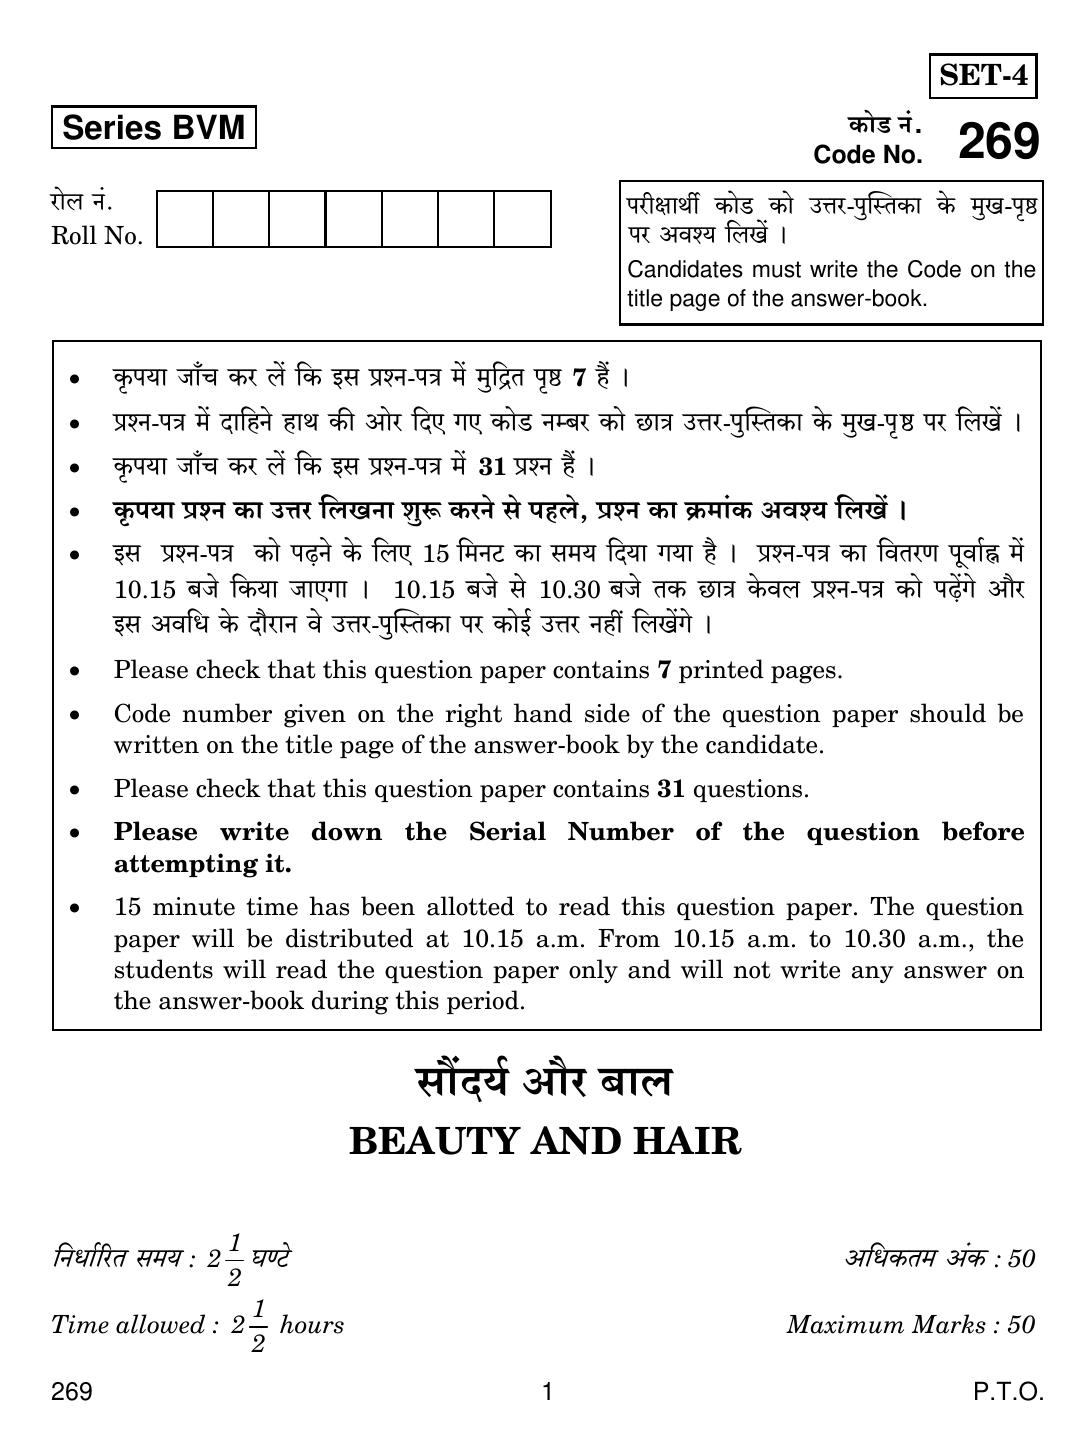 CBSE Class 12 269 Beauty And Hair 2019 Question Paper - Page 1